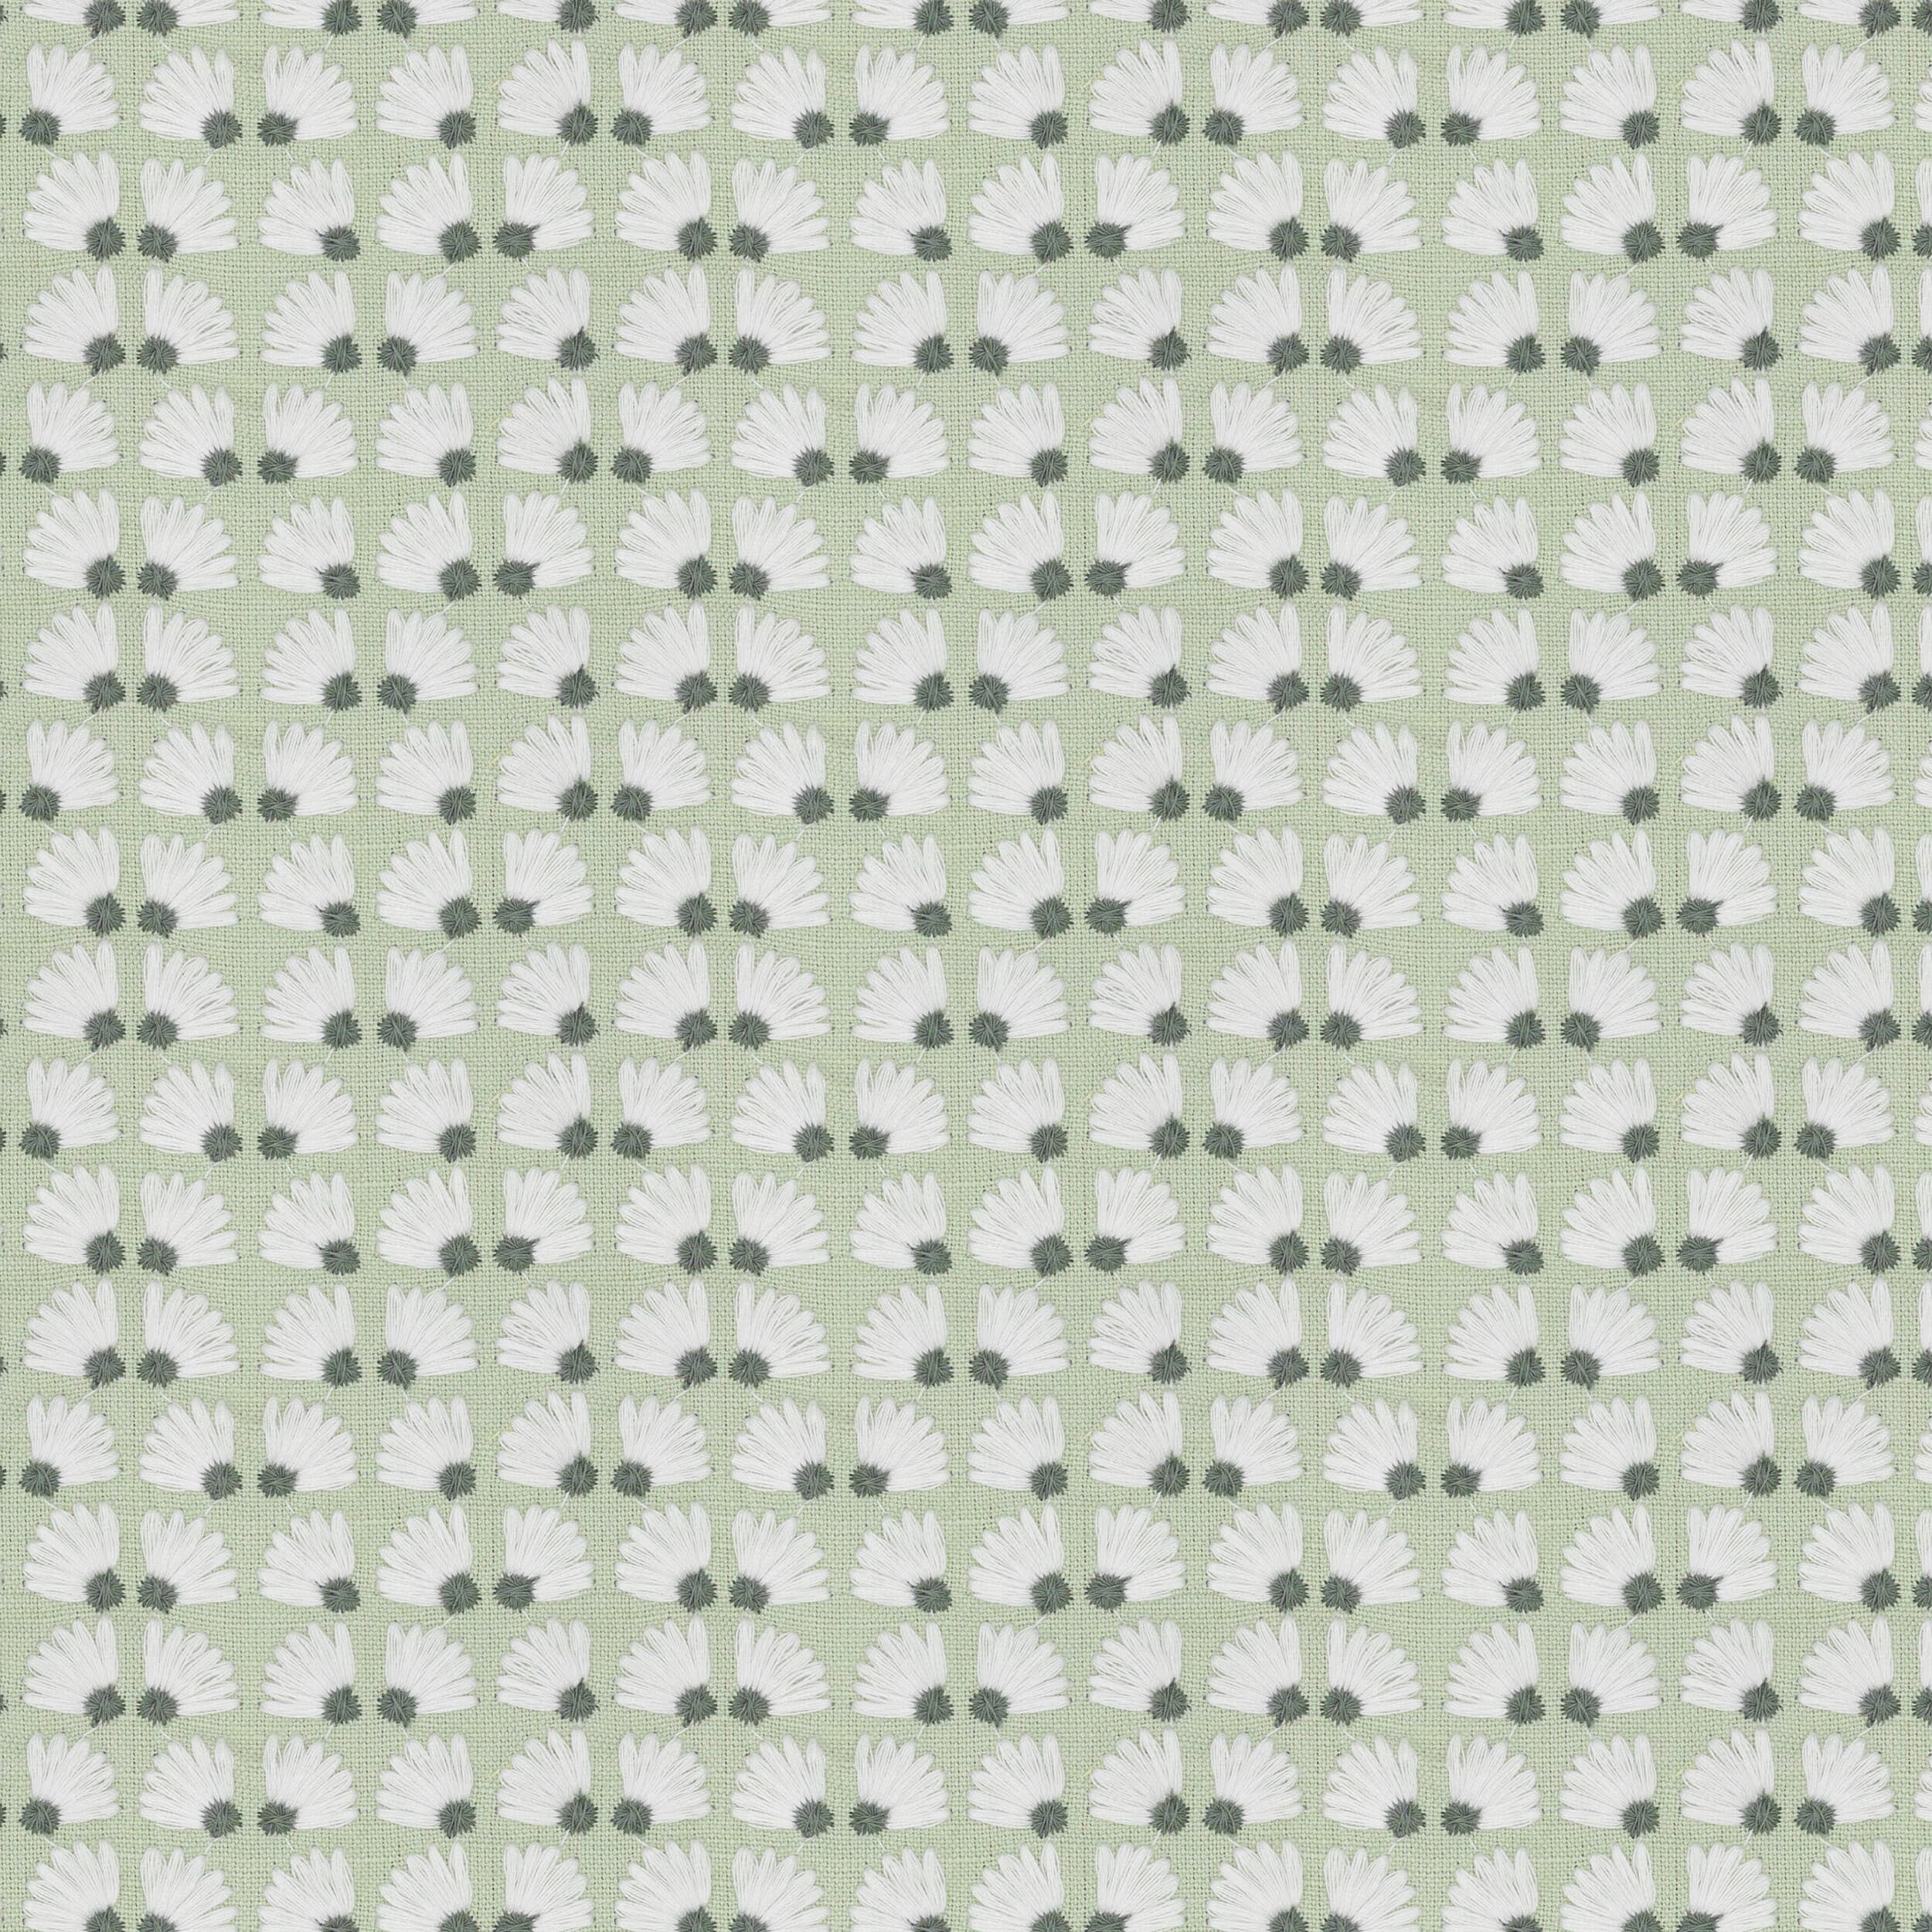 7834-2 Daisypatch Fern by Stout Fabric